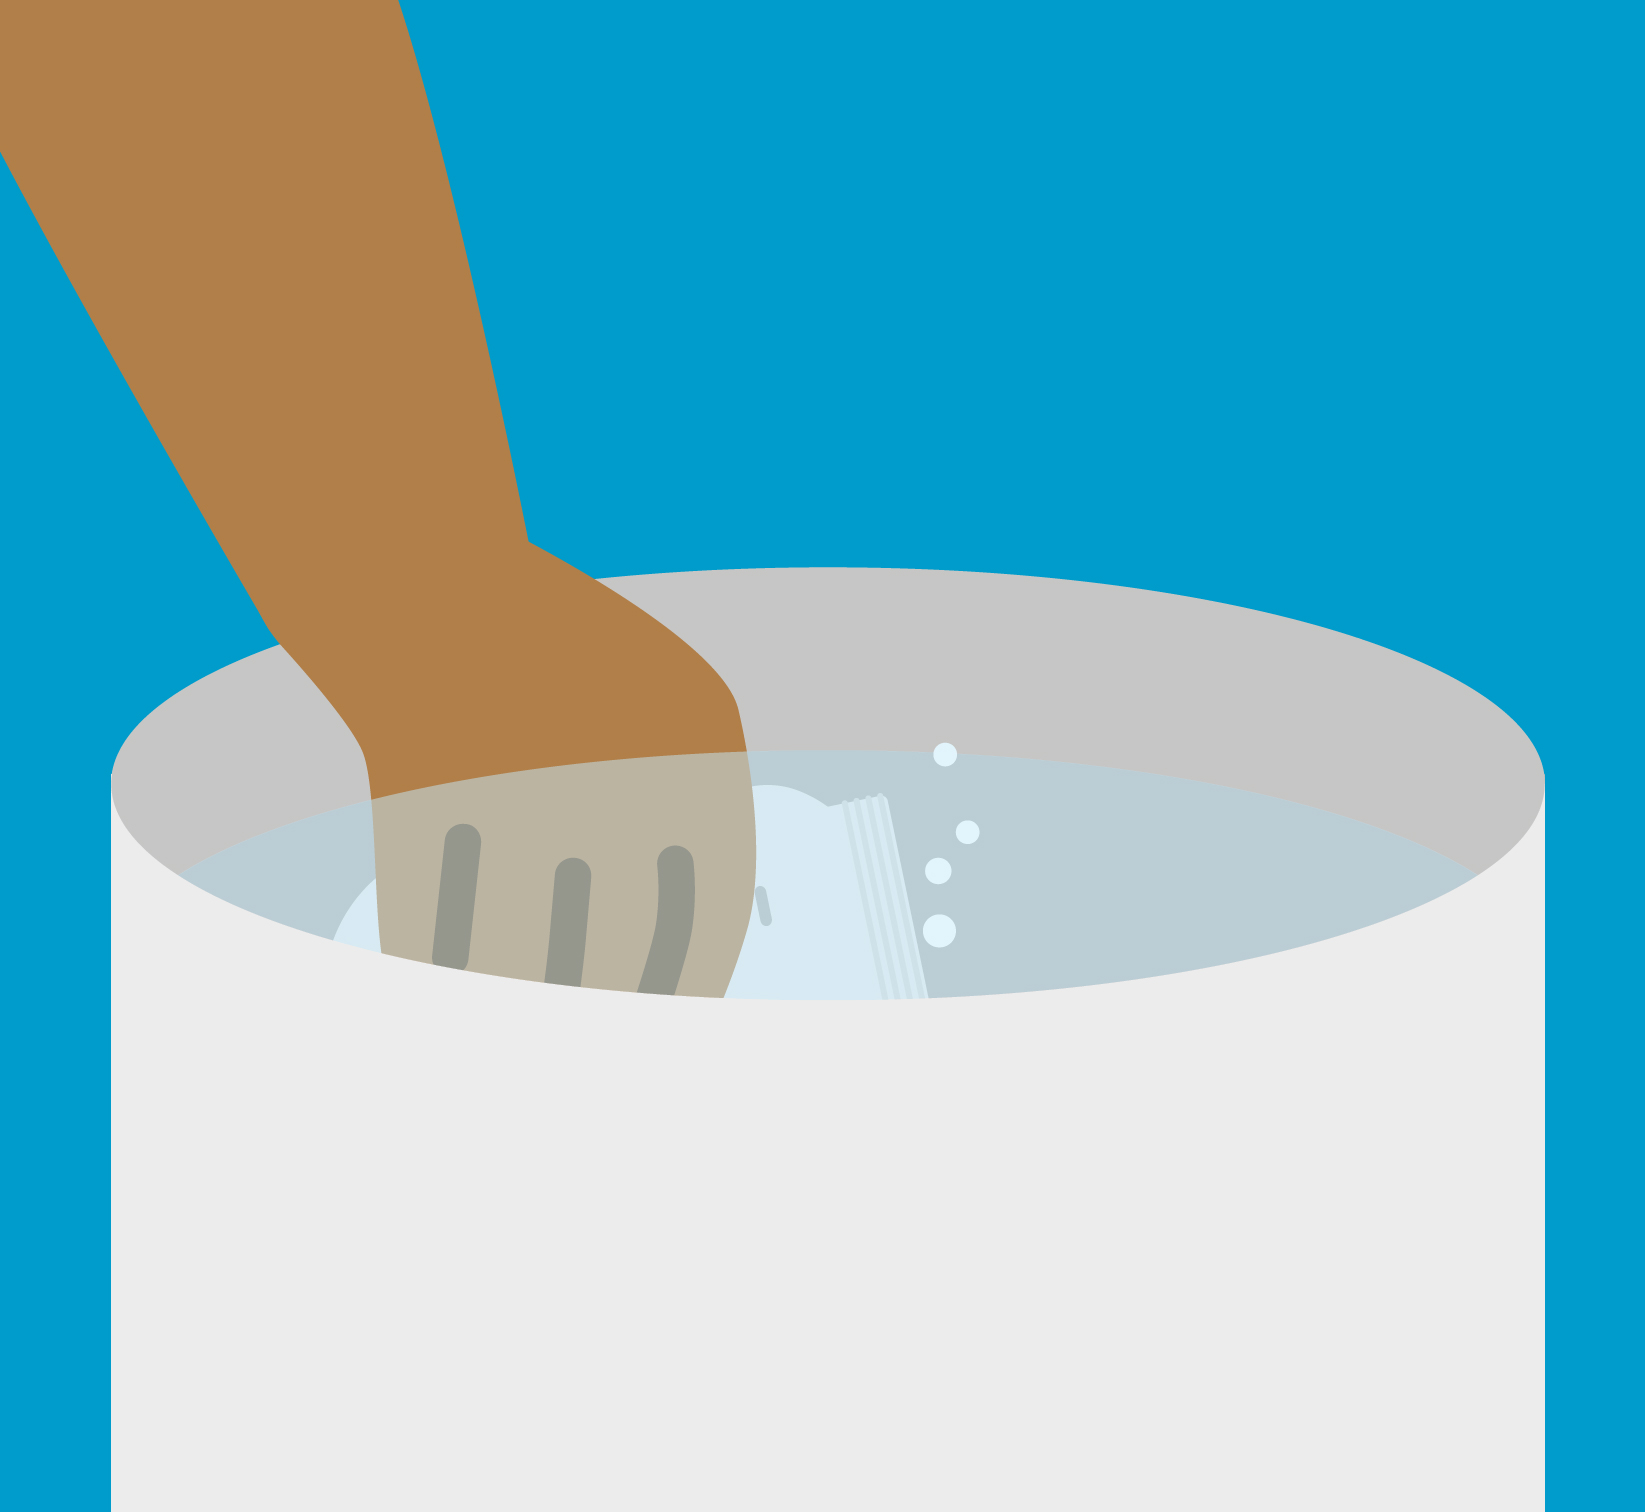 Illustration of person putting items into a boiling pan